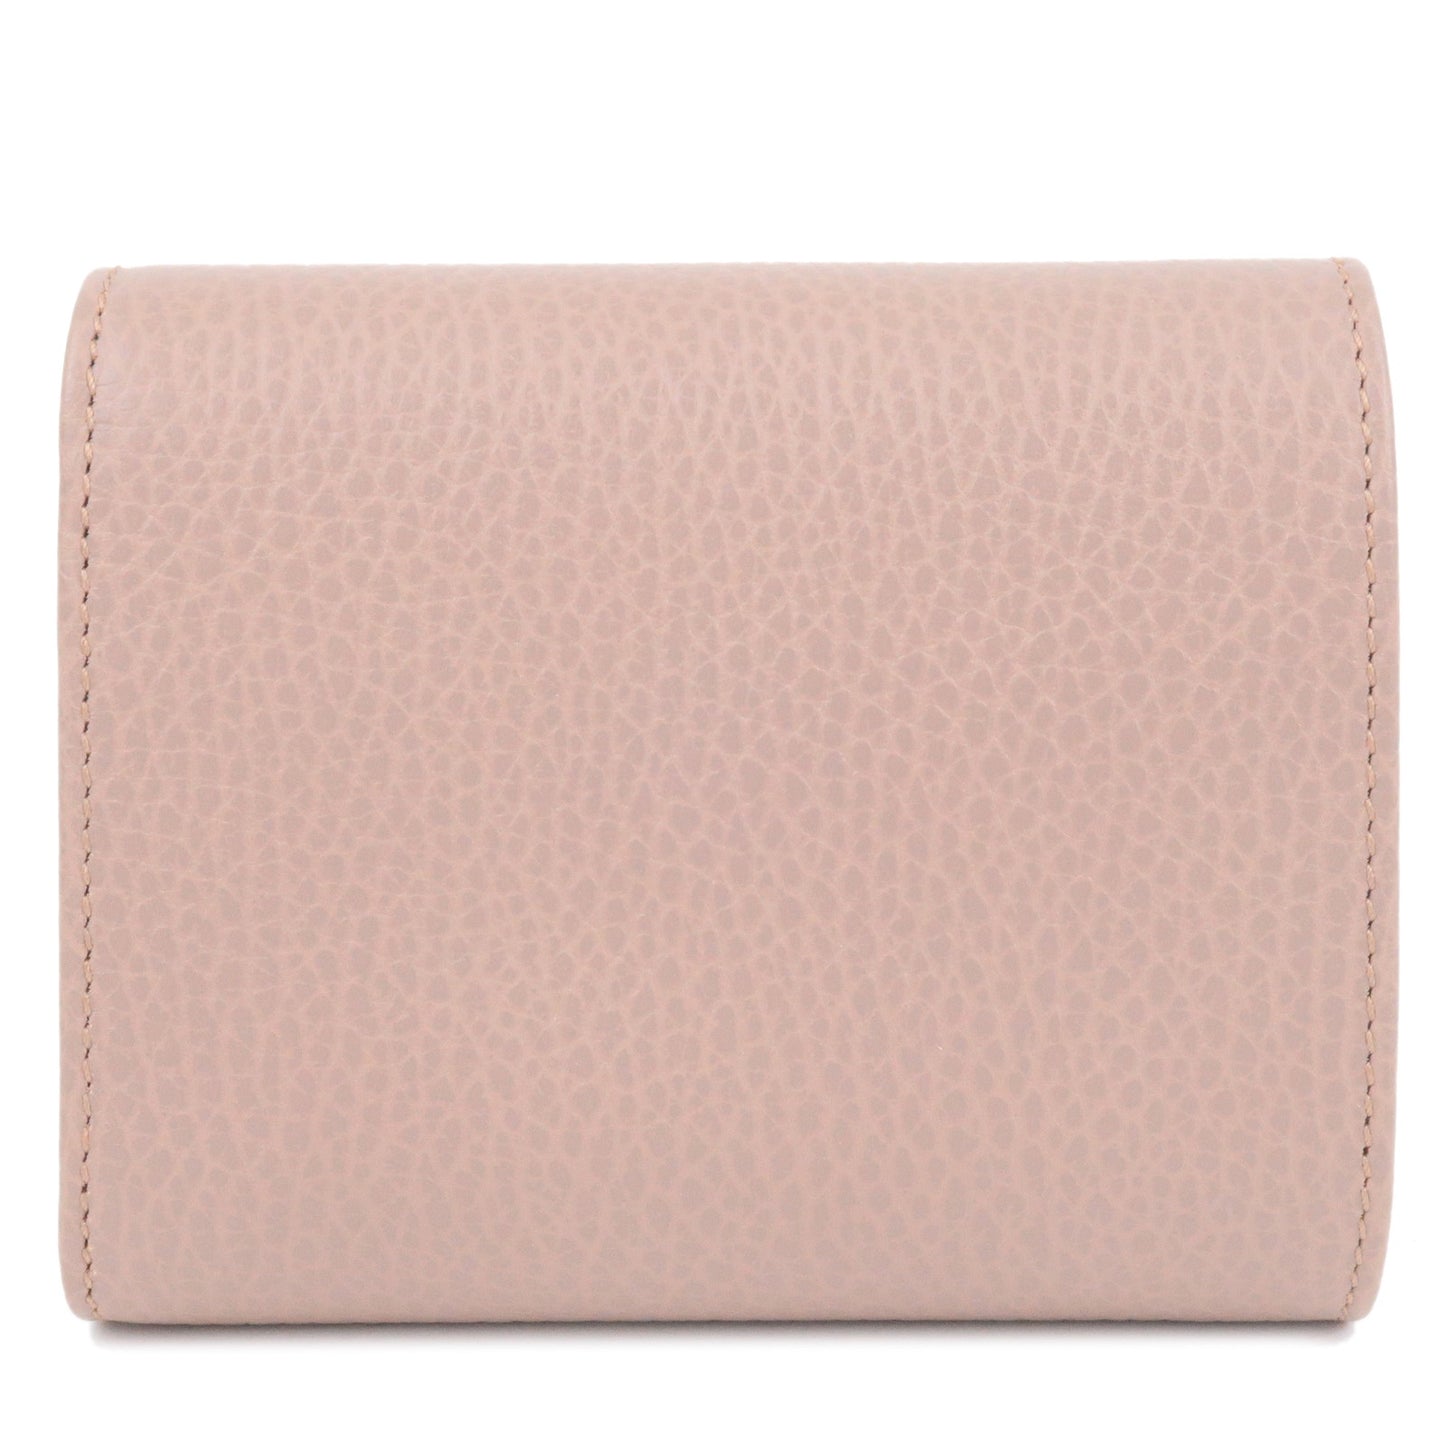 GUCCI GG Marmont Leather Trifold Wallet Pink Beige 546584